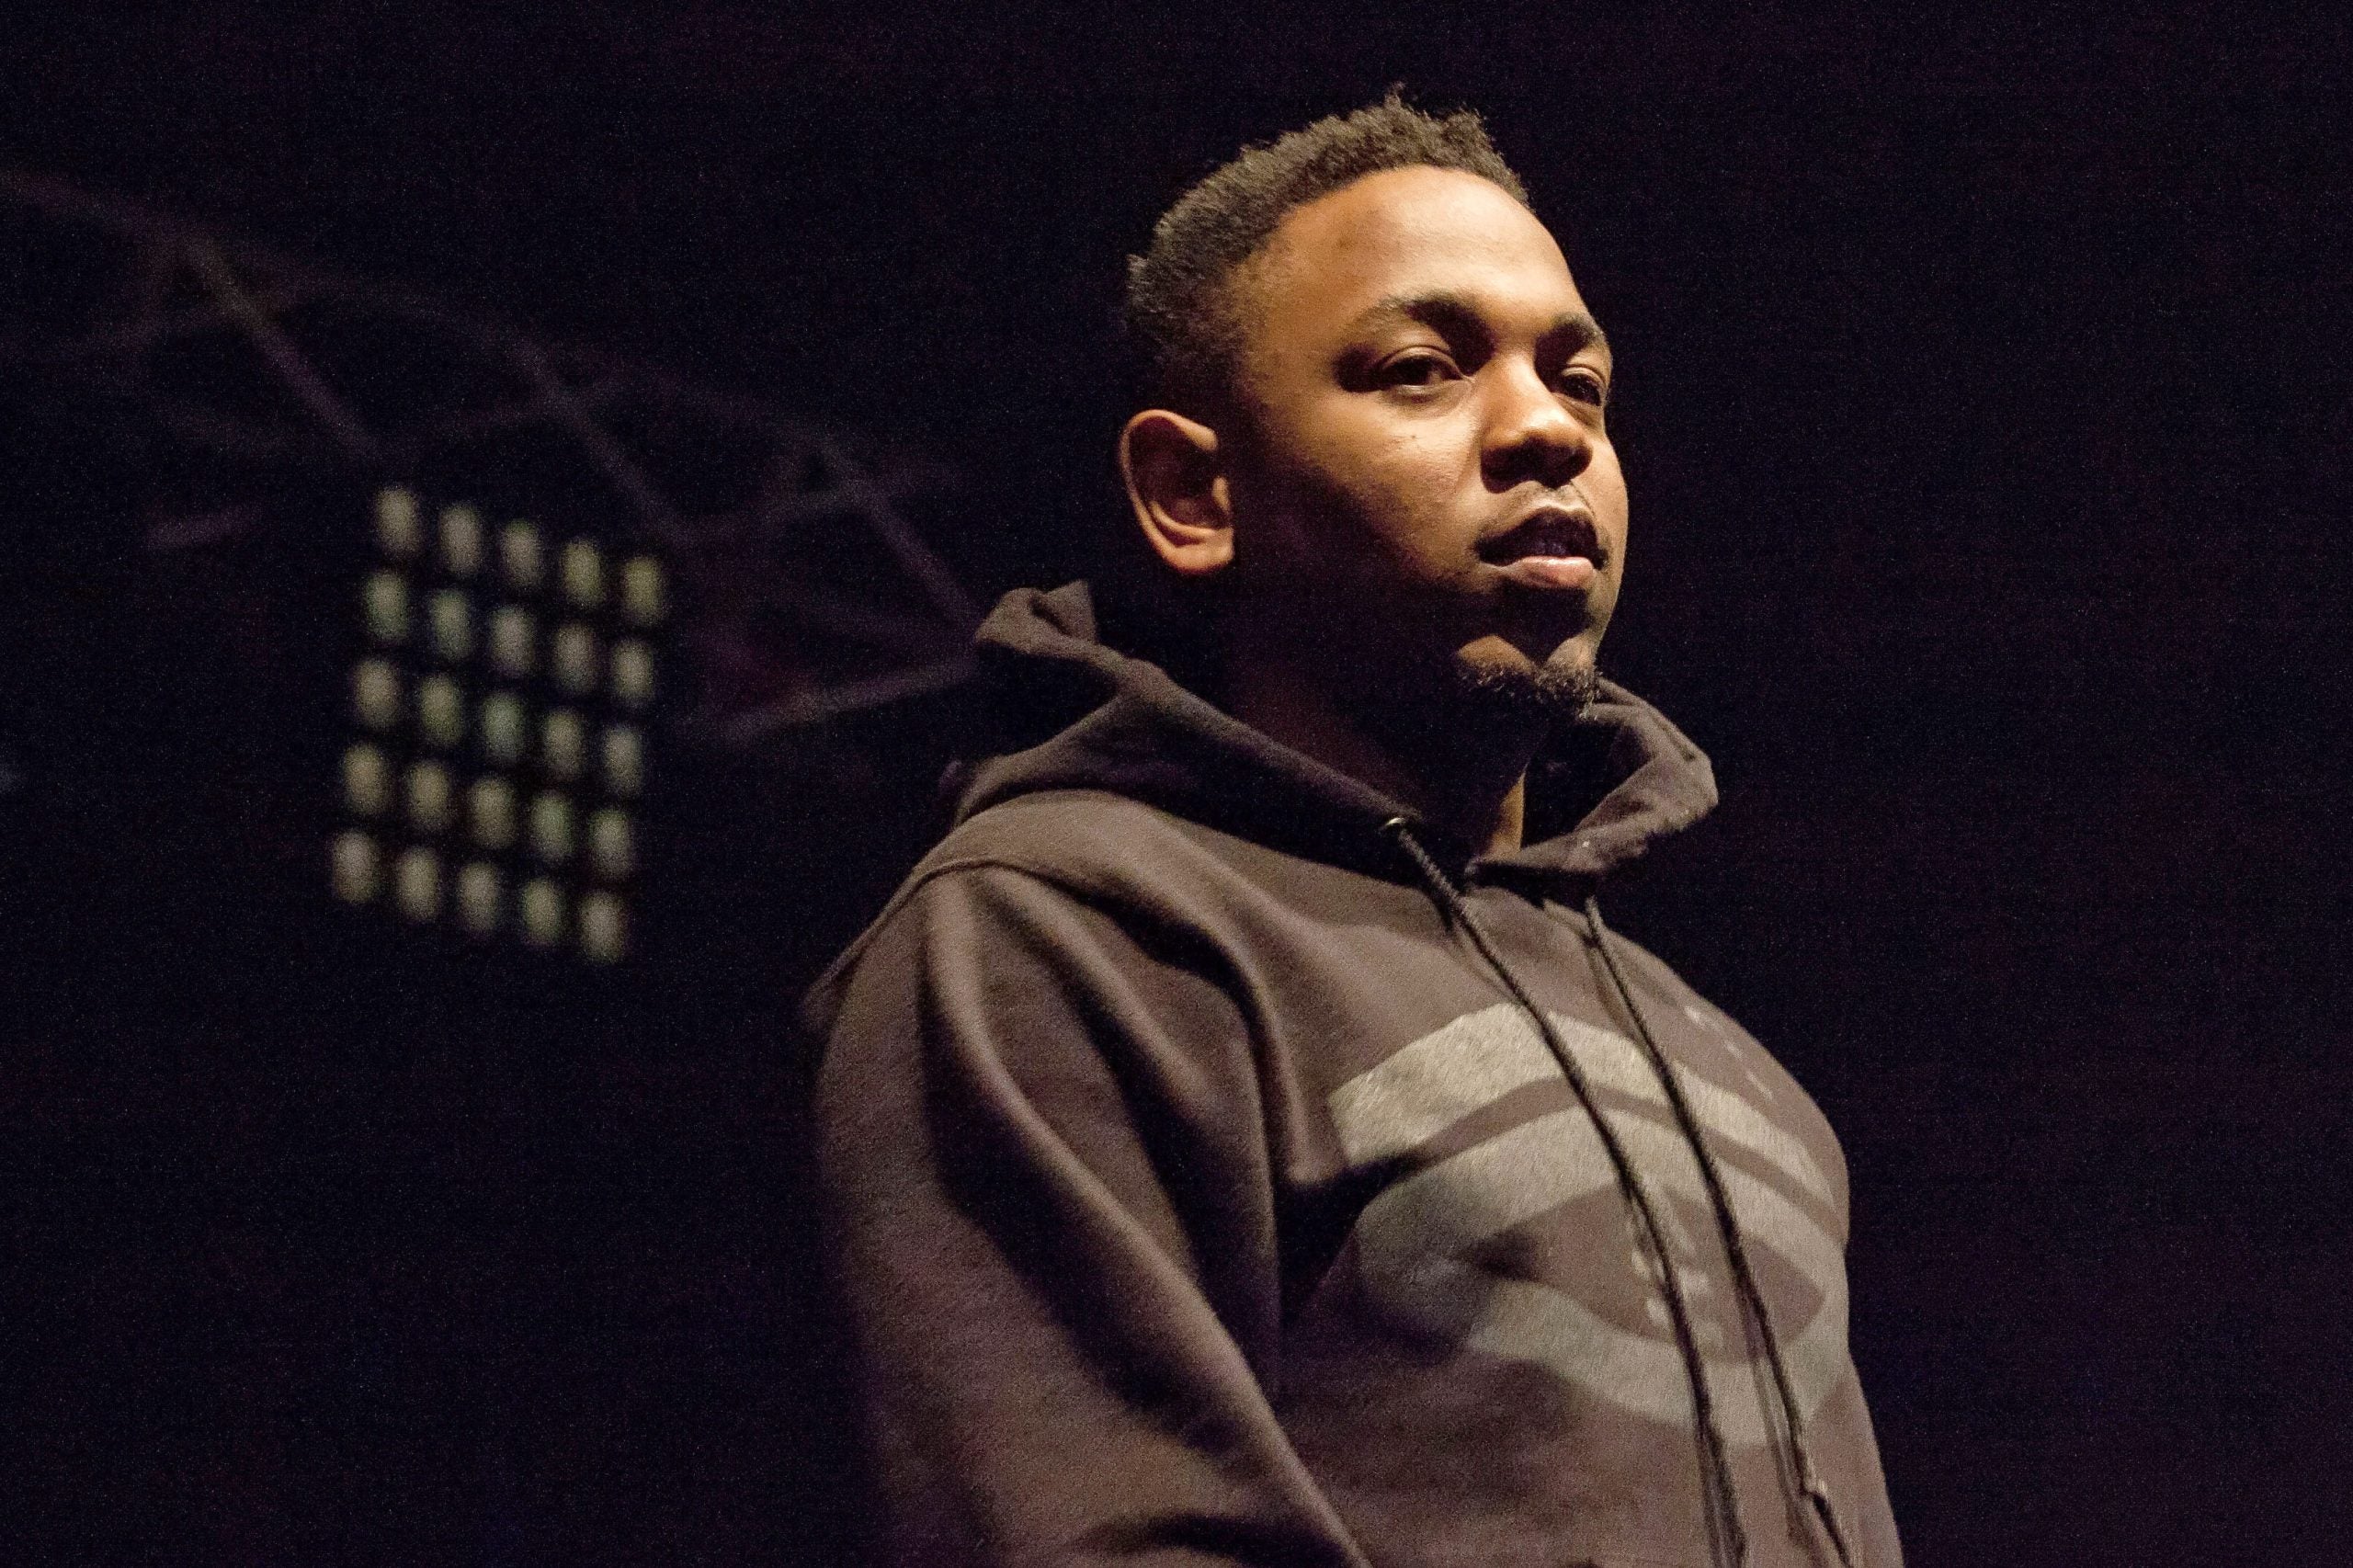 Kendrick Lamar’s ‘good kid, m.A.A.d city’: A Love Letter To Compton, And The Power Of Perseverance